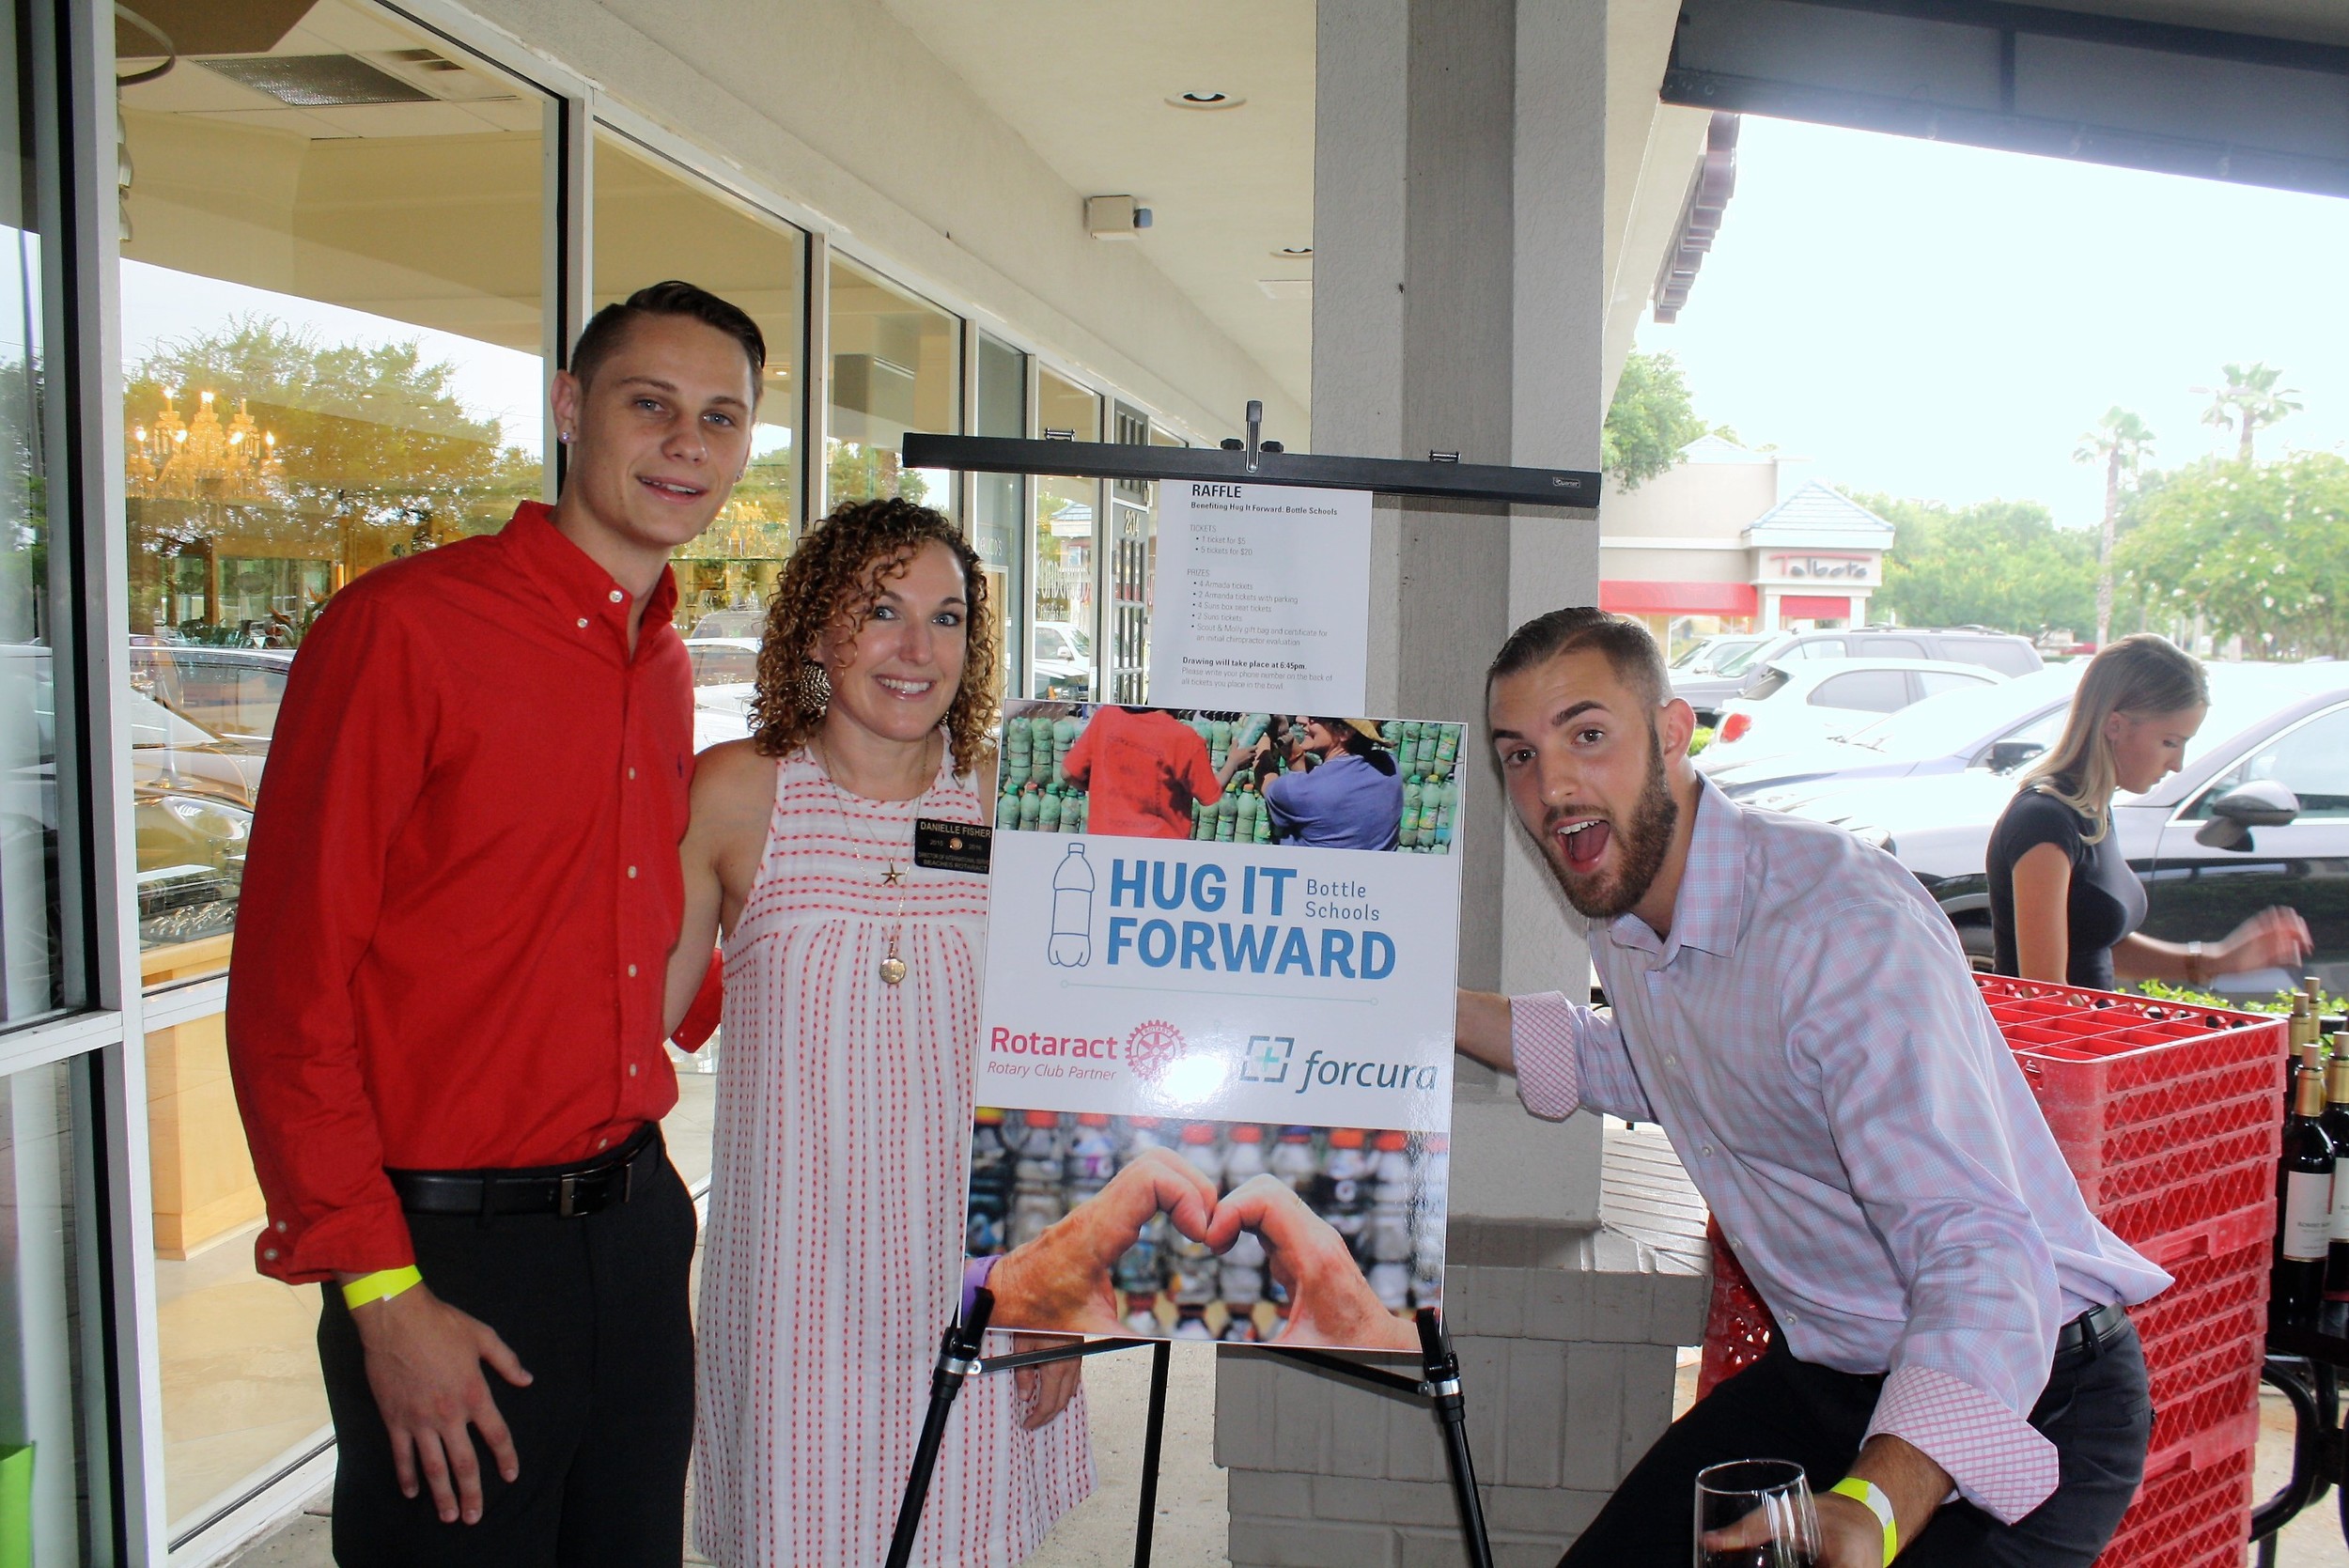 Beaches Rotaract member Danielle Fisher joins Daytona State Rotaract members Justin Gadrim (left) and Michael Tirpak at the wine tasting to raise funds to build a school in Guatemala.